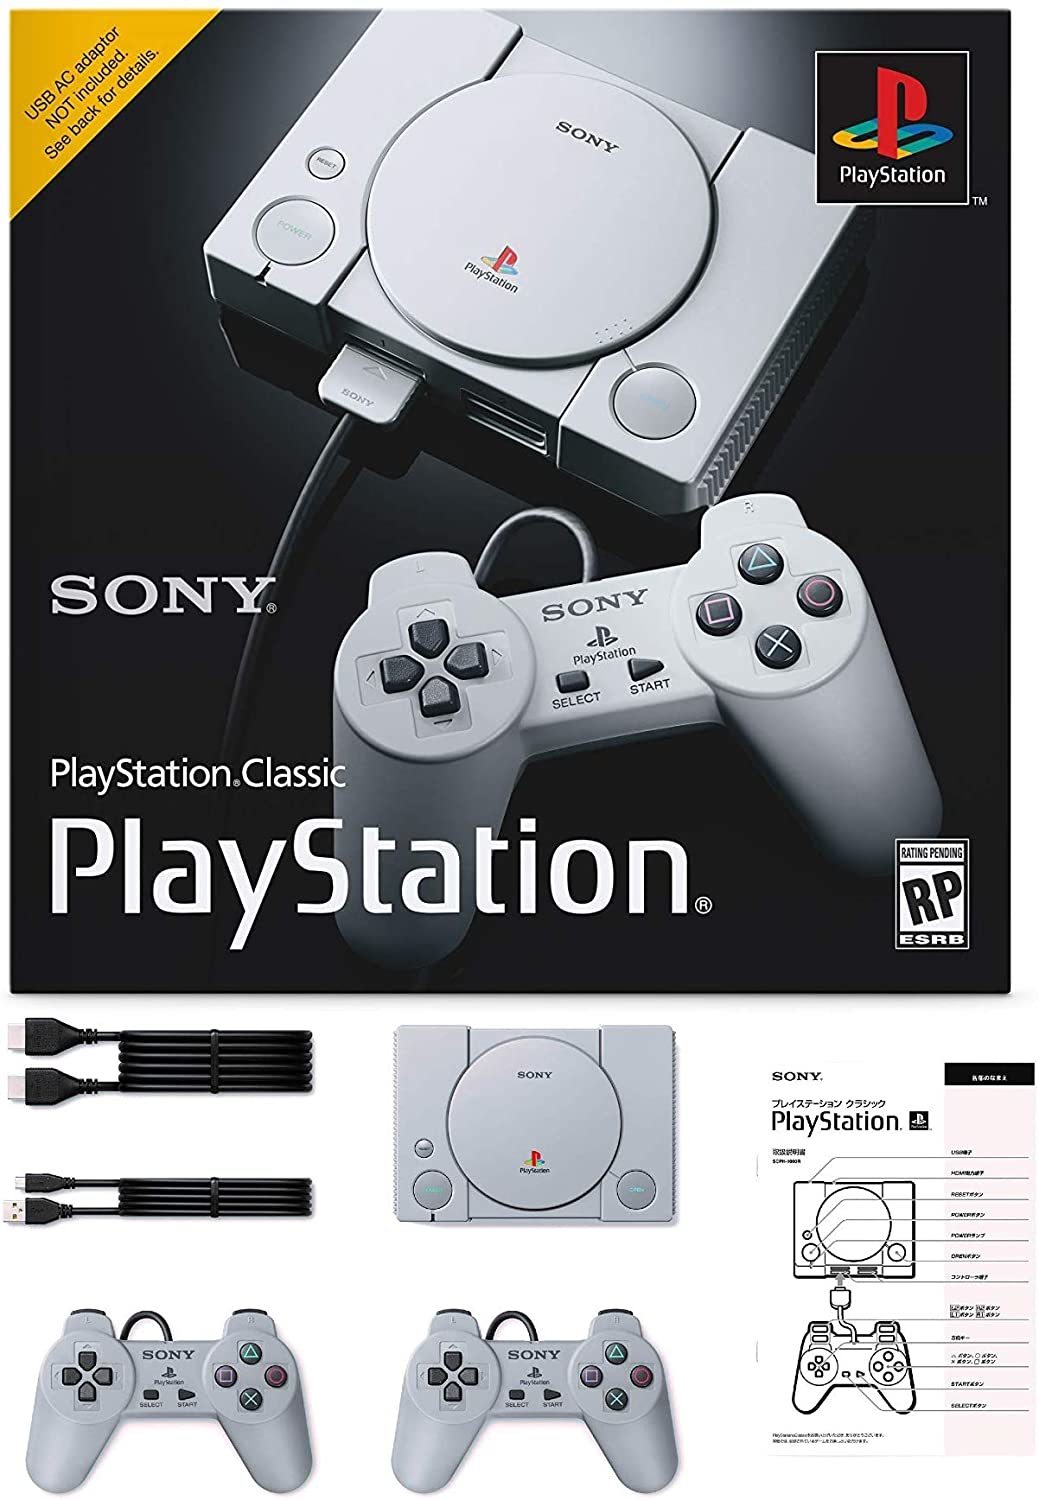 Holiday 20-Game Bonus Bundle For The Sony Playstation Classic Console. - $110.99